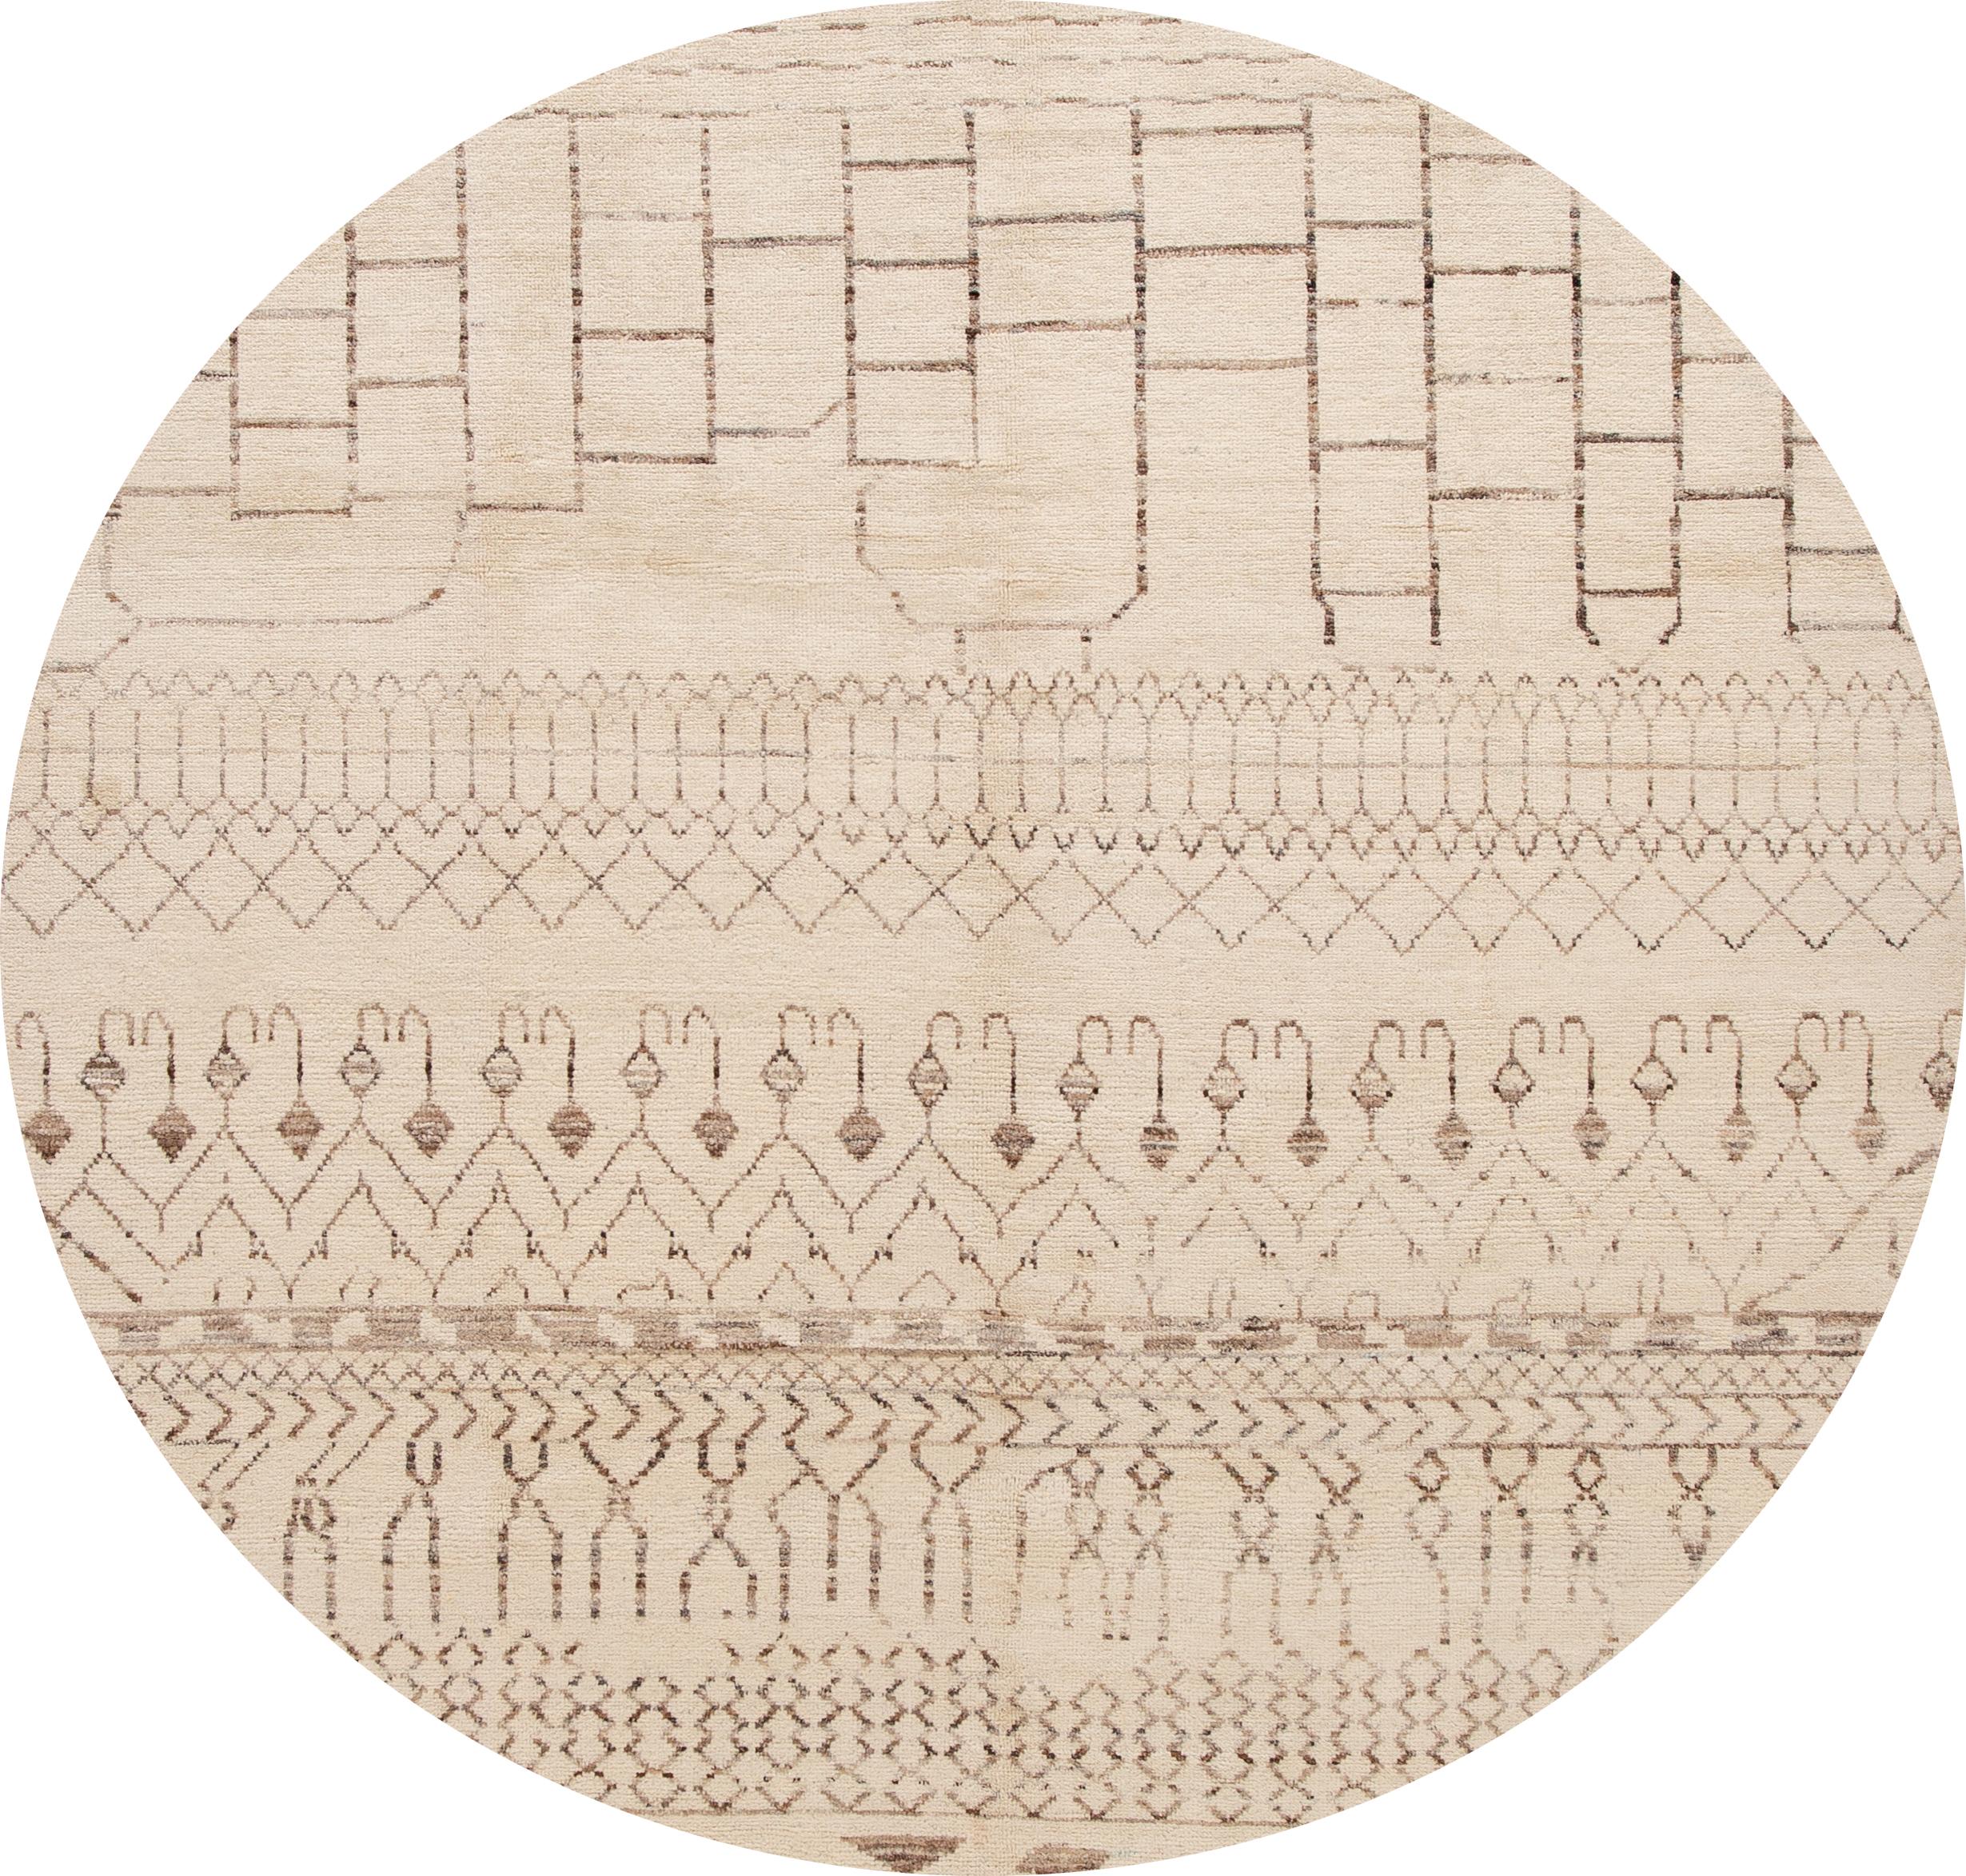 Beautiful hand-knotted Modern Moroccan-Style wool rug with the beige field, and brown accents in an all-over Tribal design. 

This rug measures: 8' x 10'3